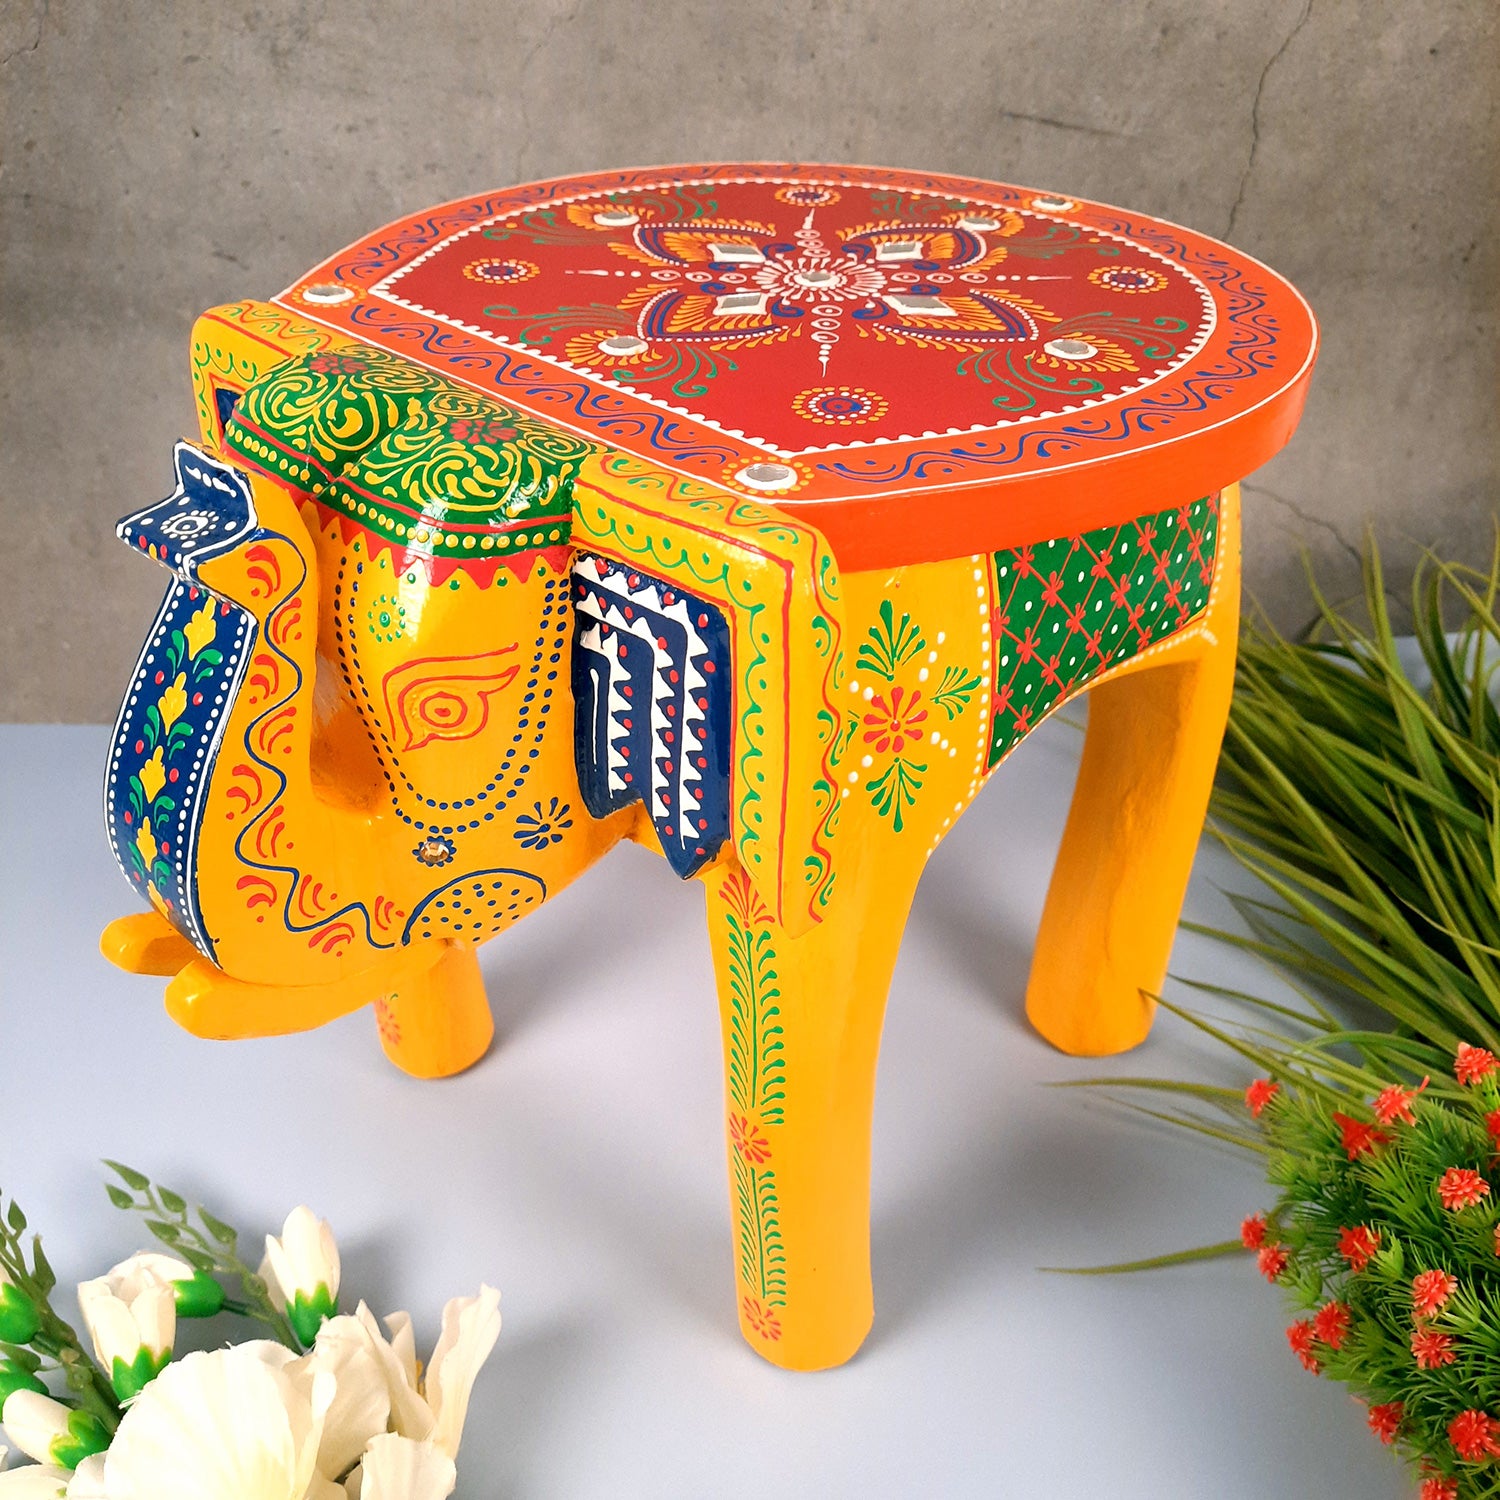 Side Table Cum Stool - Elephant Design | Wooden Stools for Keeping Lamp, Vases & Plants - for Home Decor, Corners, Sofa Side Stool, Office & Gifts - 12 Inch - Apkamart #Color_Yellow